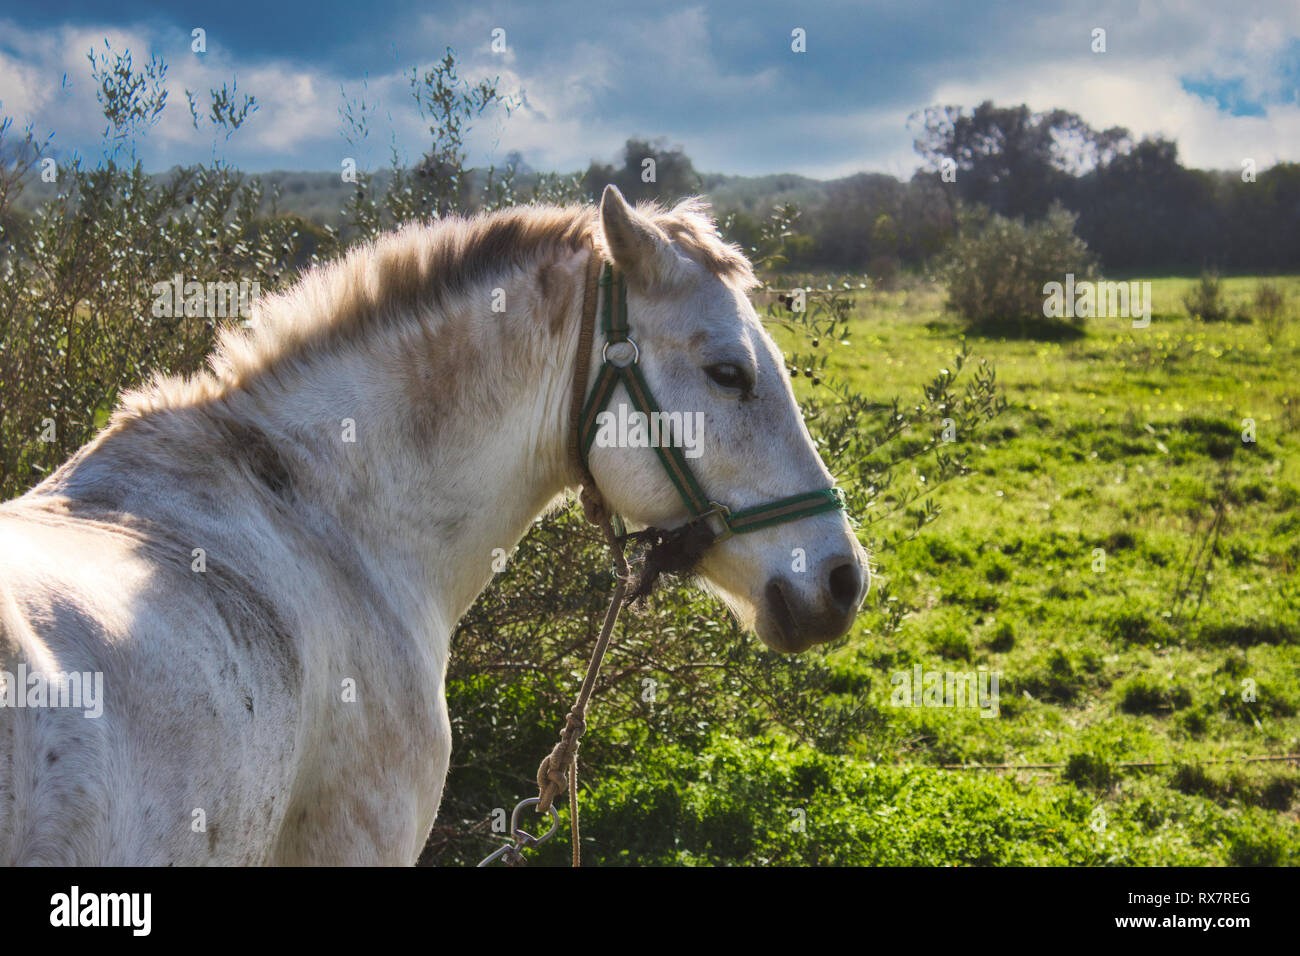 A white / grey horse tied with a rope in a field with olive trees under a blue, cloudy sky Stock Photo